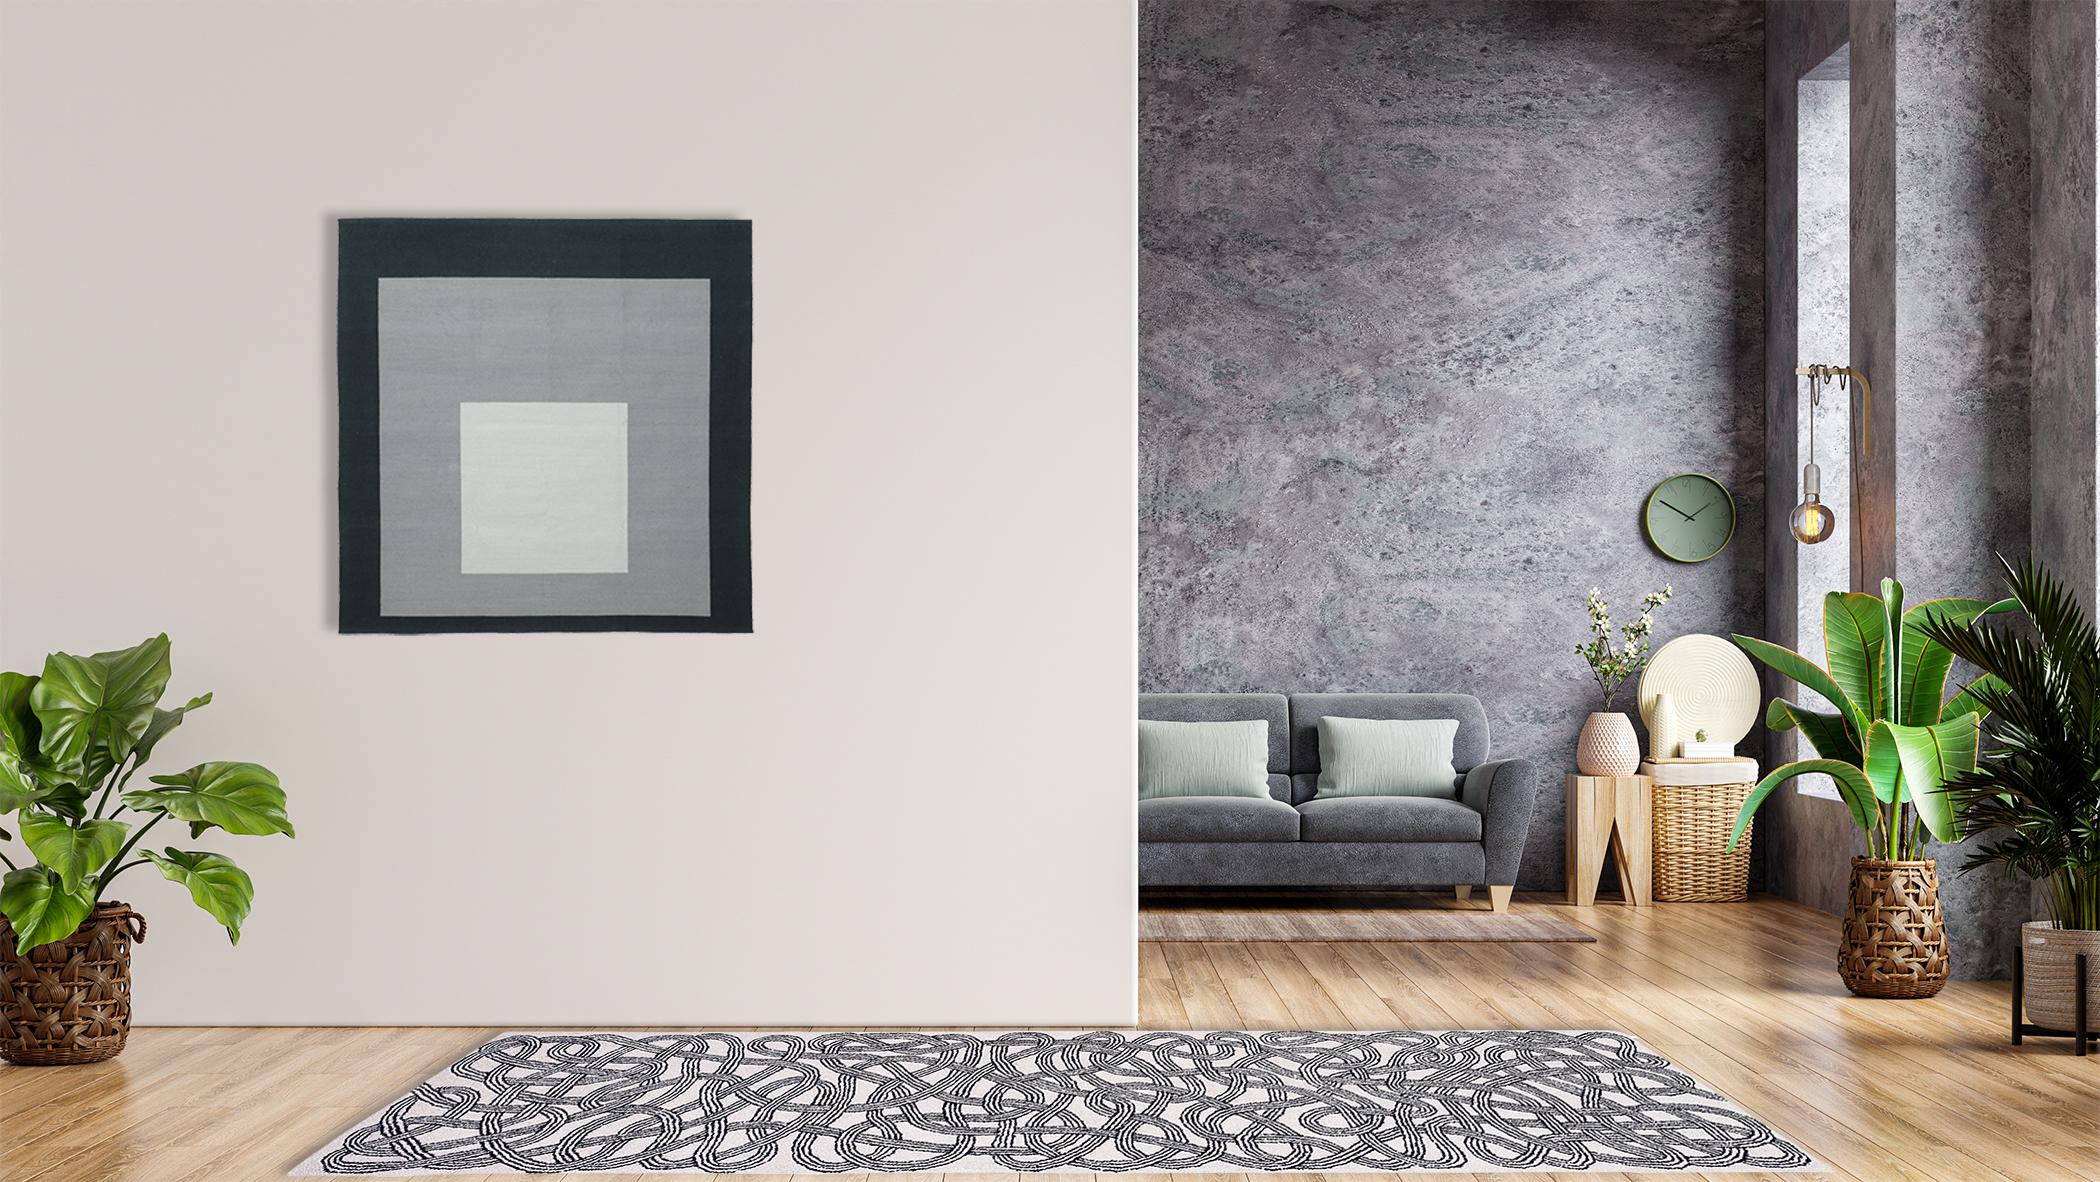 Produced in association with the Josef and Anni Albers Foundation. Certificate of Authenticity included.

This classic, black and white hand-tufted wool runner by Anni Albers is adapted from a 1959 runner design and is available in two sizes. The